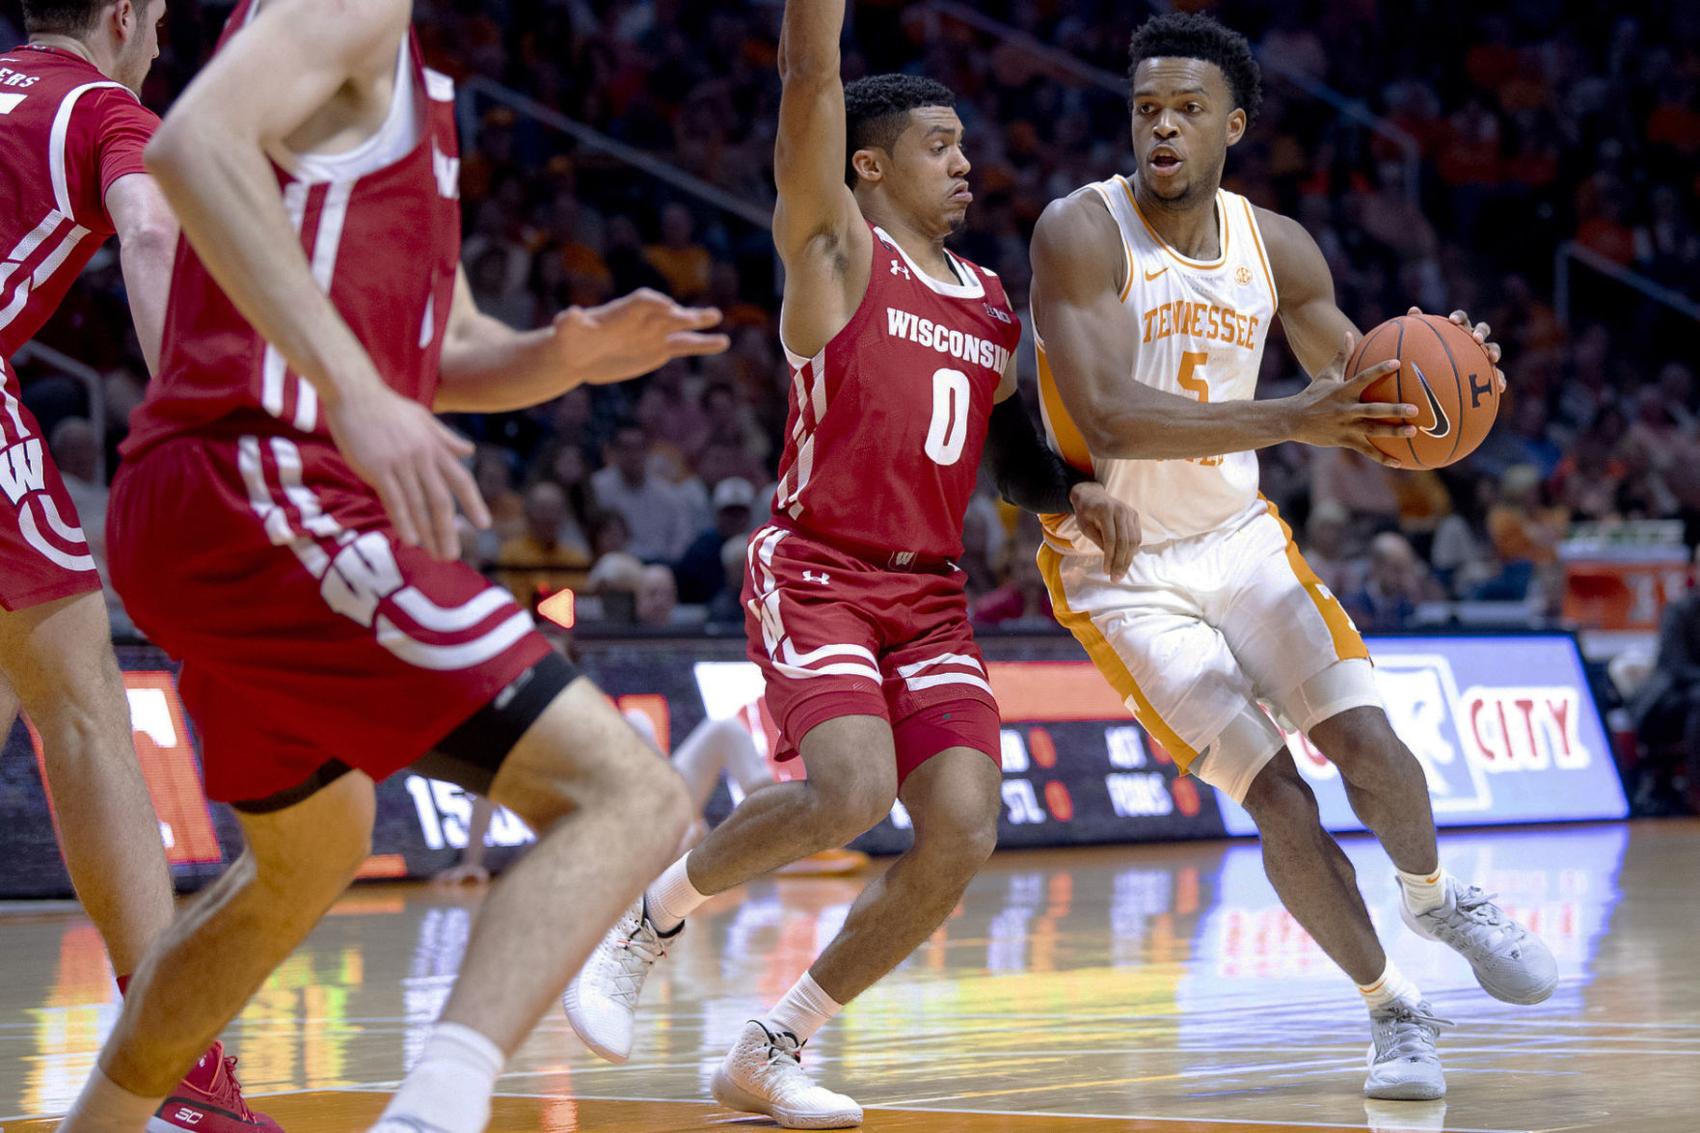 Wisconsin Badgers roll past Tennessee Volunteers to earn first road win